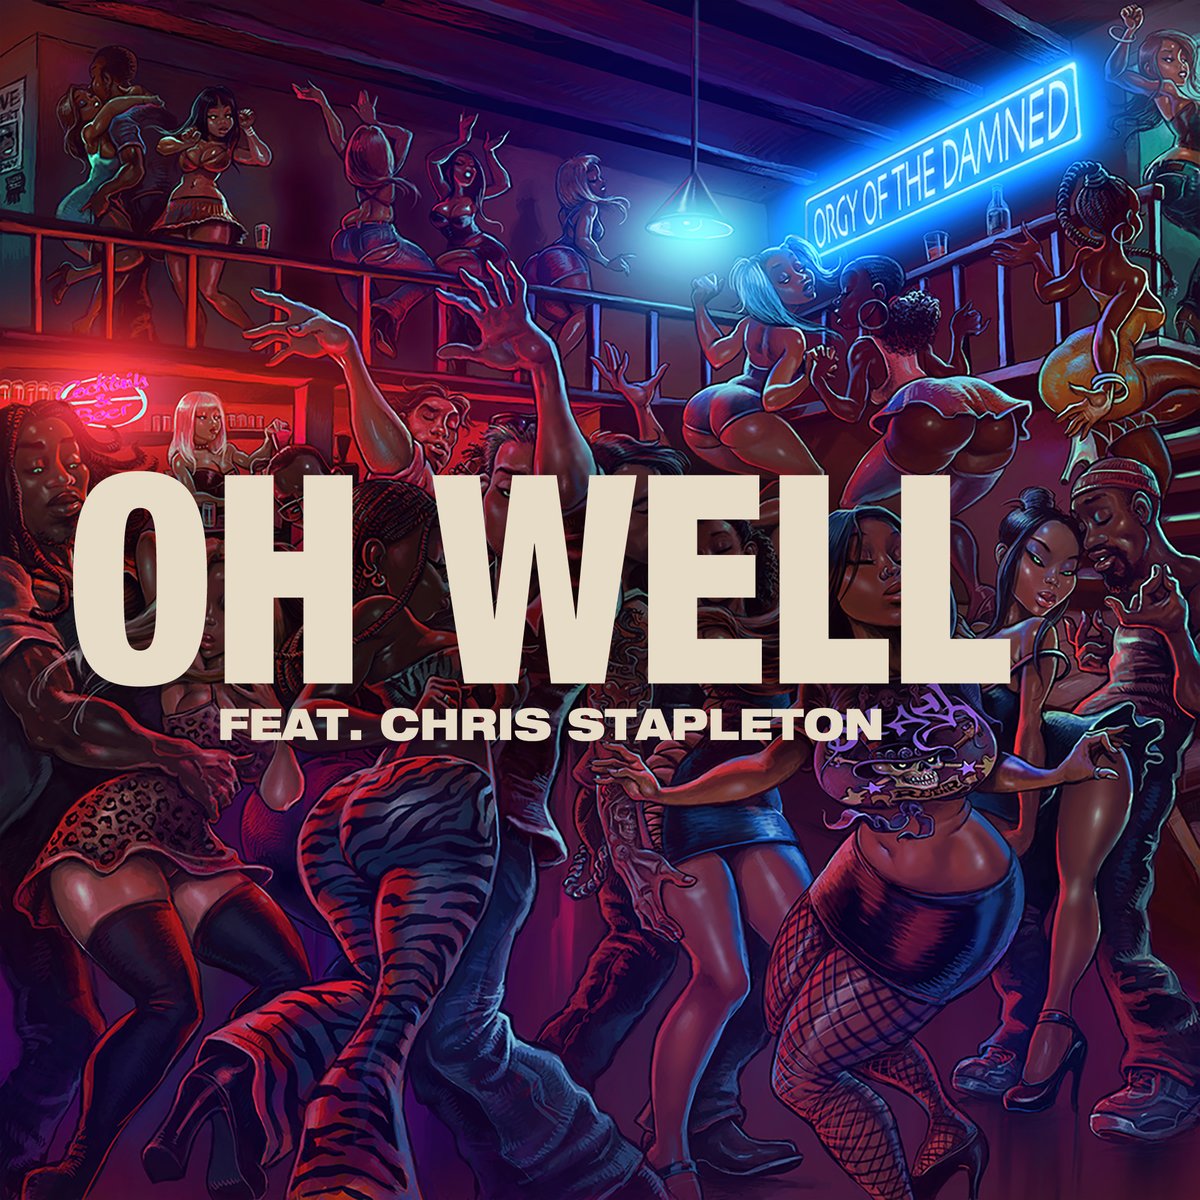 New single from @Slash, 'Oh Well feat. @ChrisStapleton' OUT NOW everywhere via Gibson Records. ▶️ gibson.lnk.to/SlashOhWell #gibson #gibsonrecords #slash #slashnews